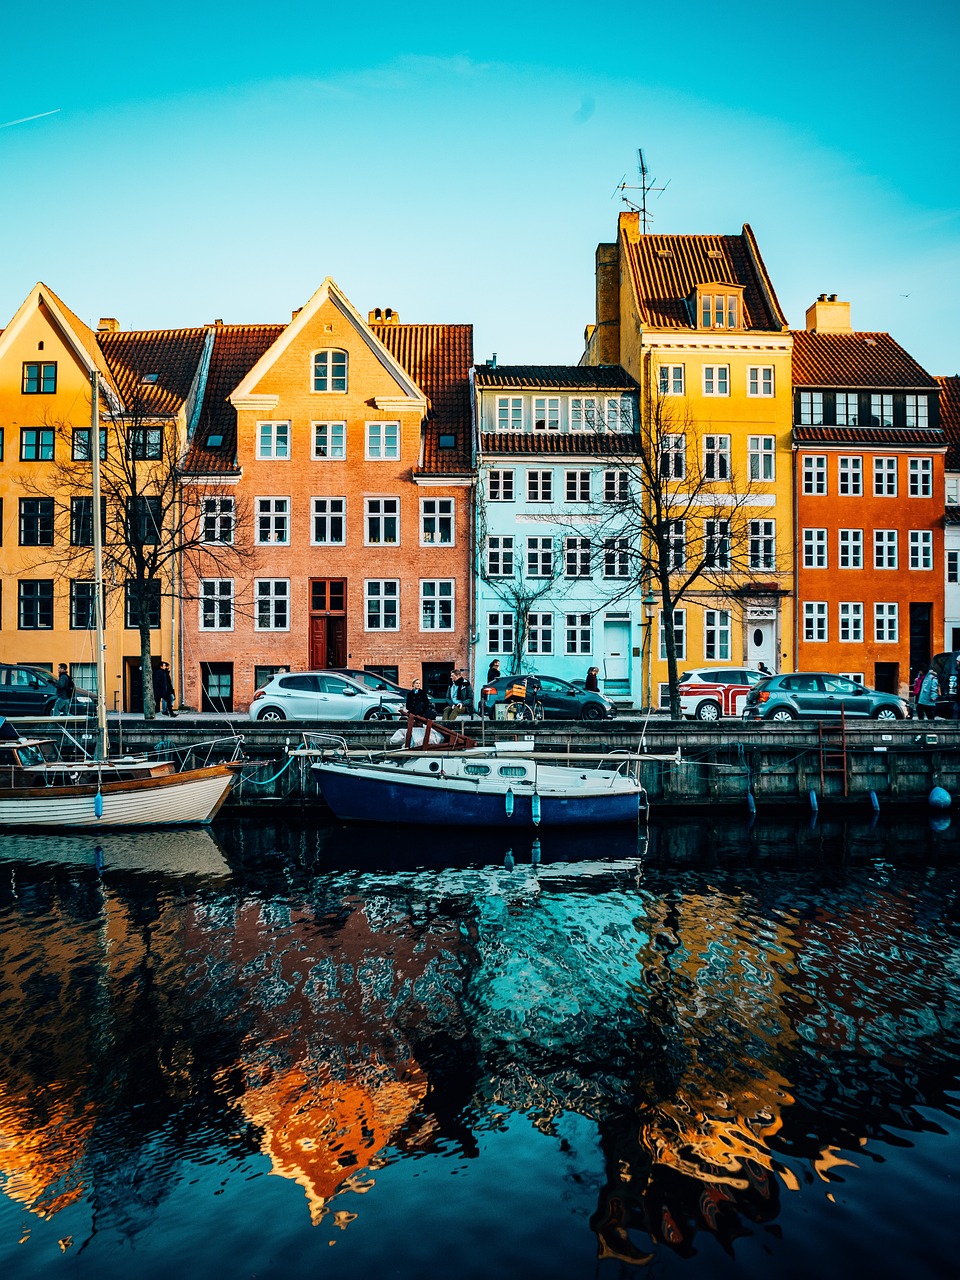 Hygge and History: A Cozy Day in Copenhagen